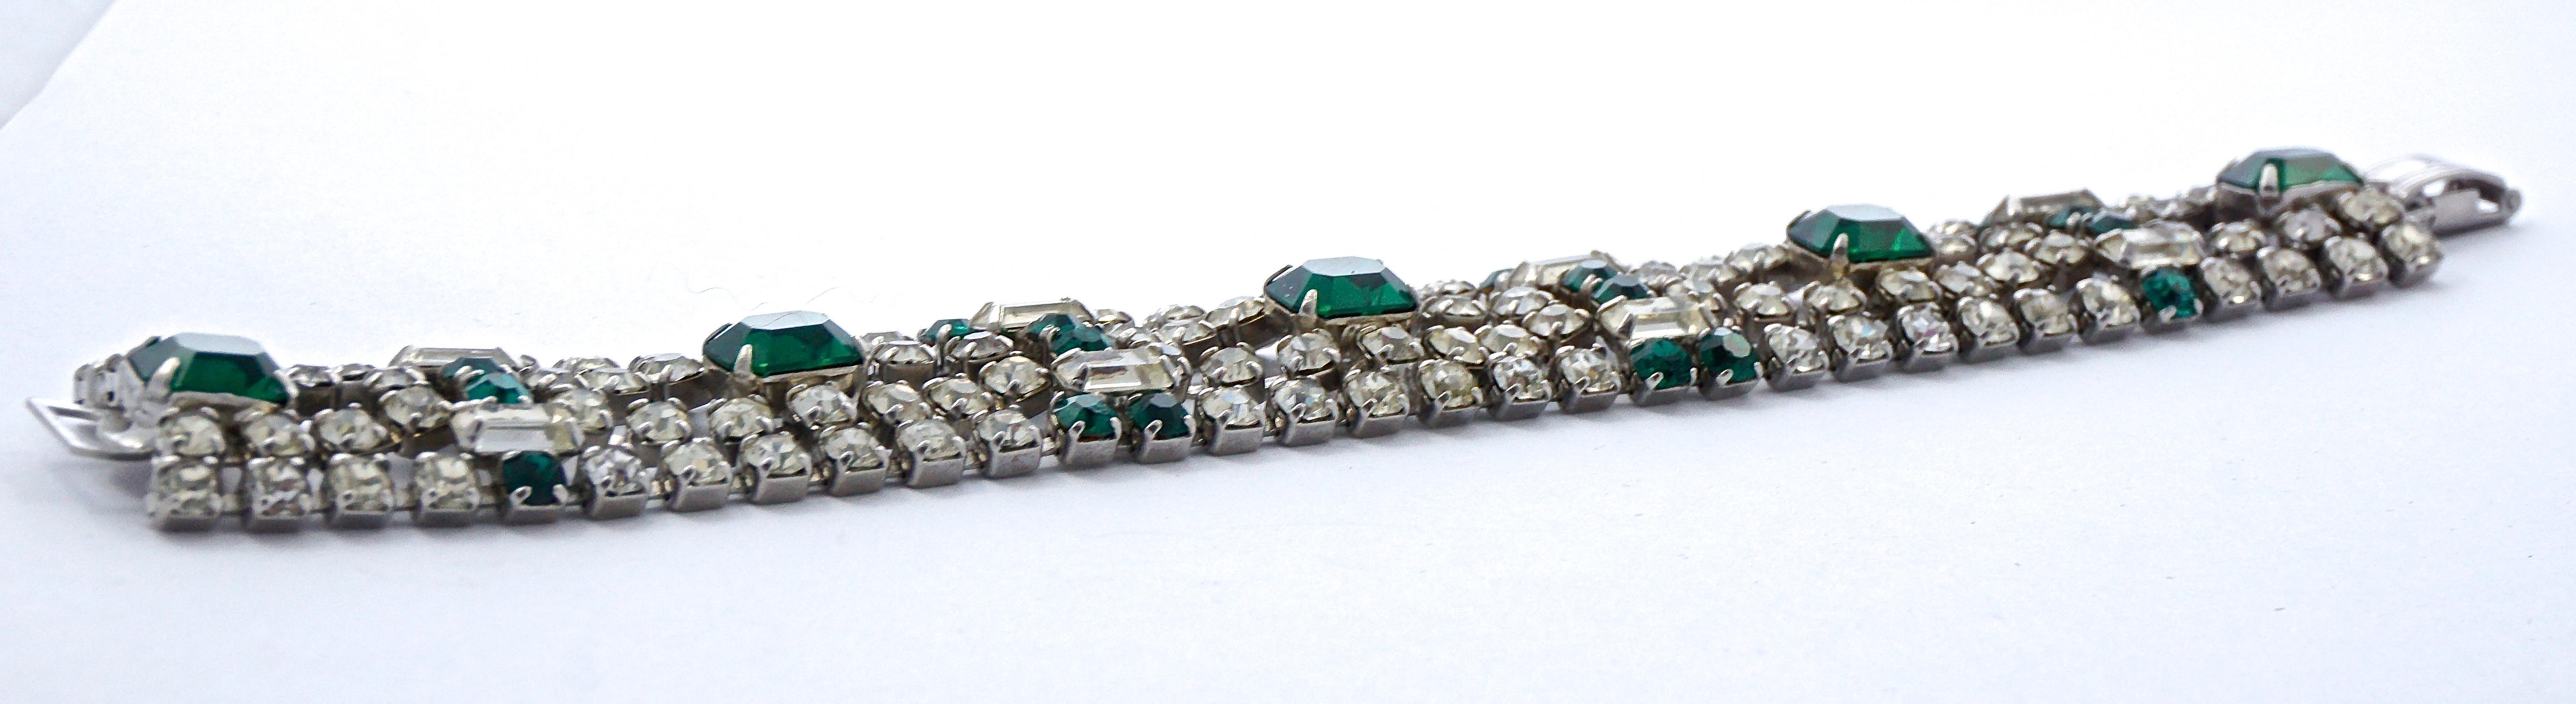 1950s Silver Tone Emerald Green and Clear Rhinestones Bracelet In Good Condition For Sale In London, GB